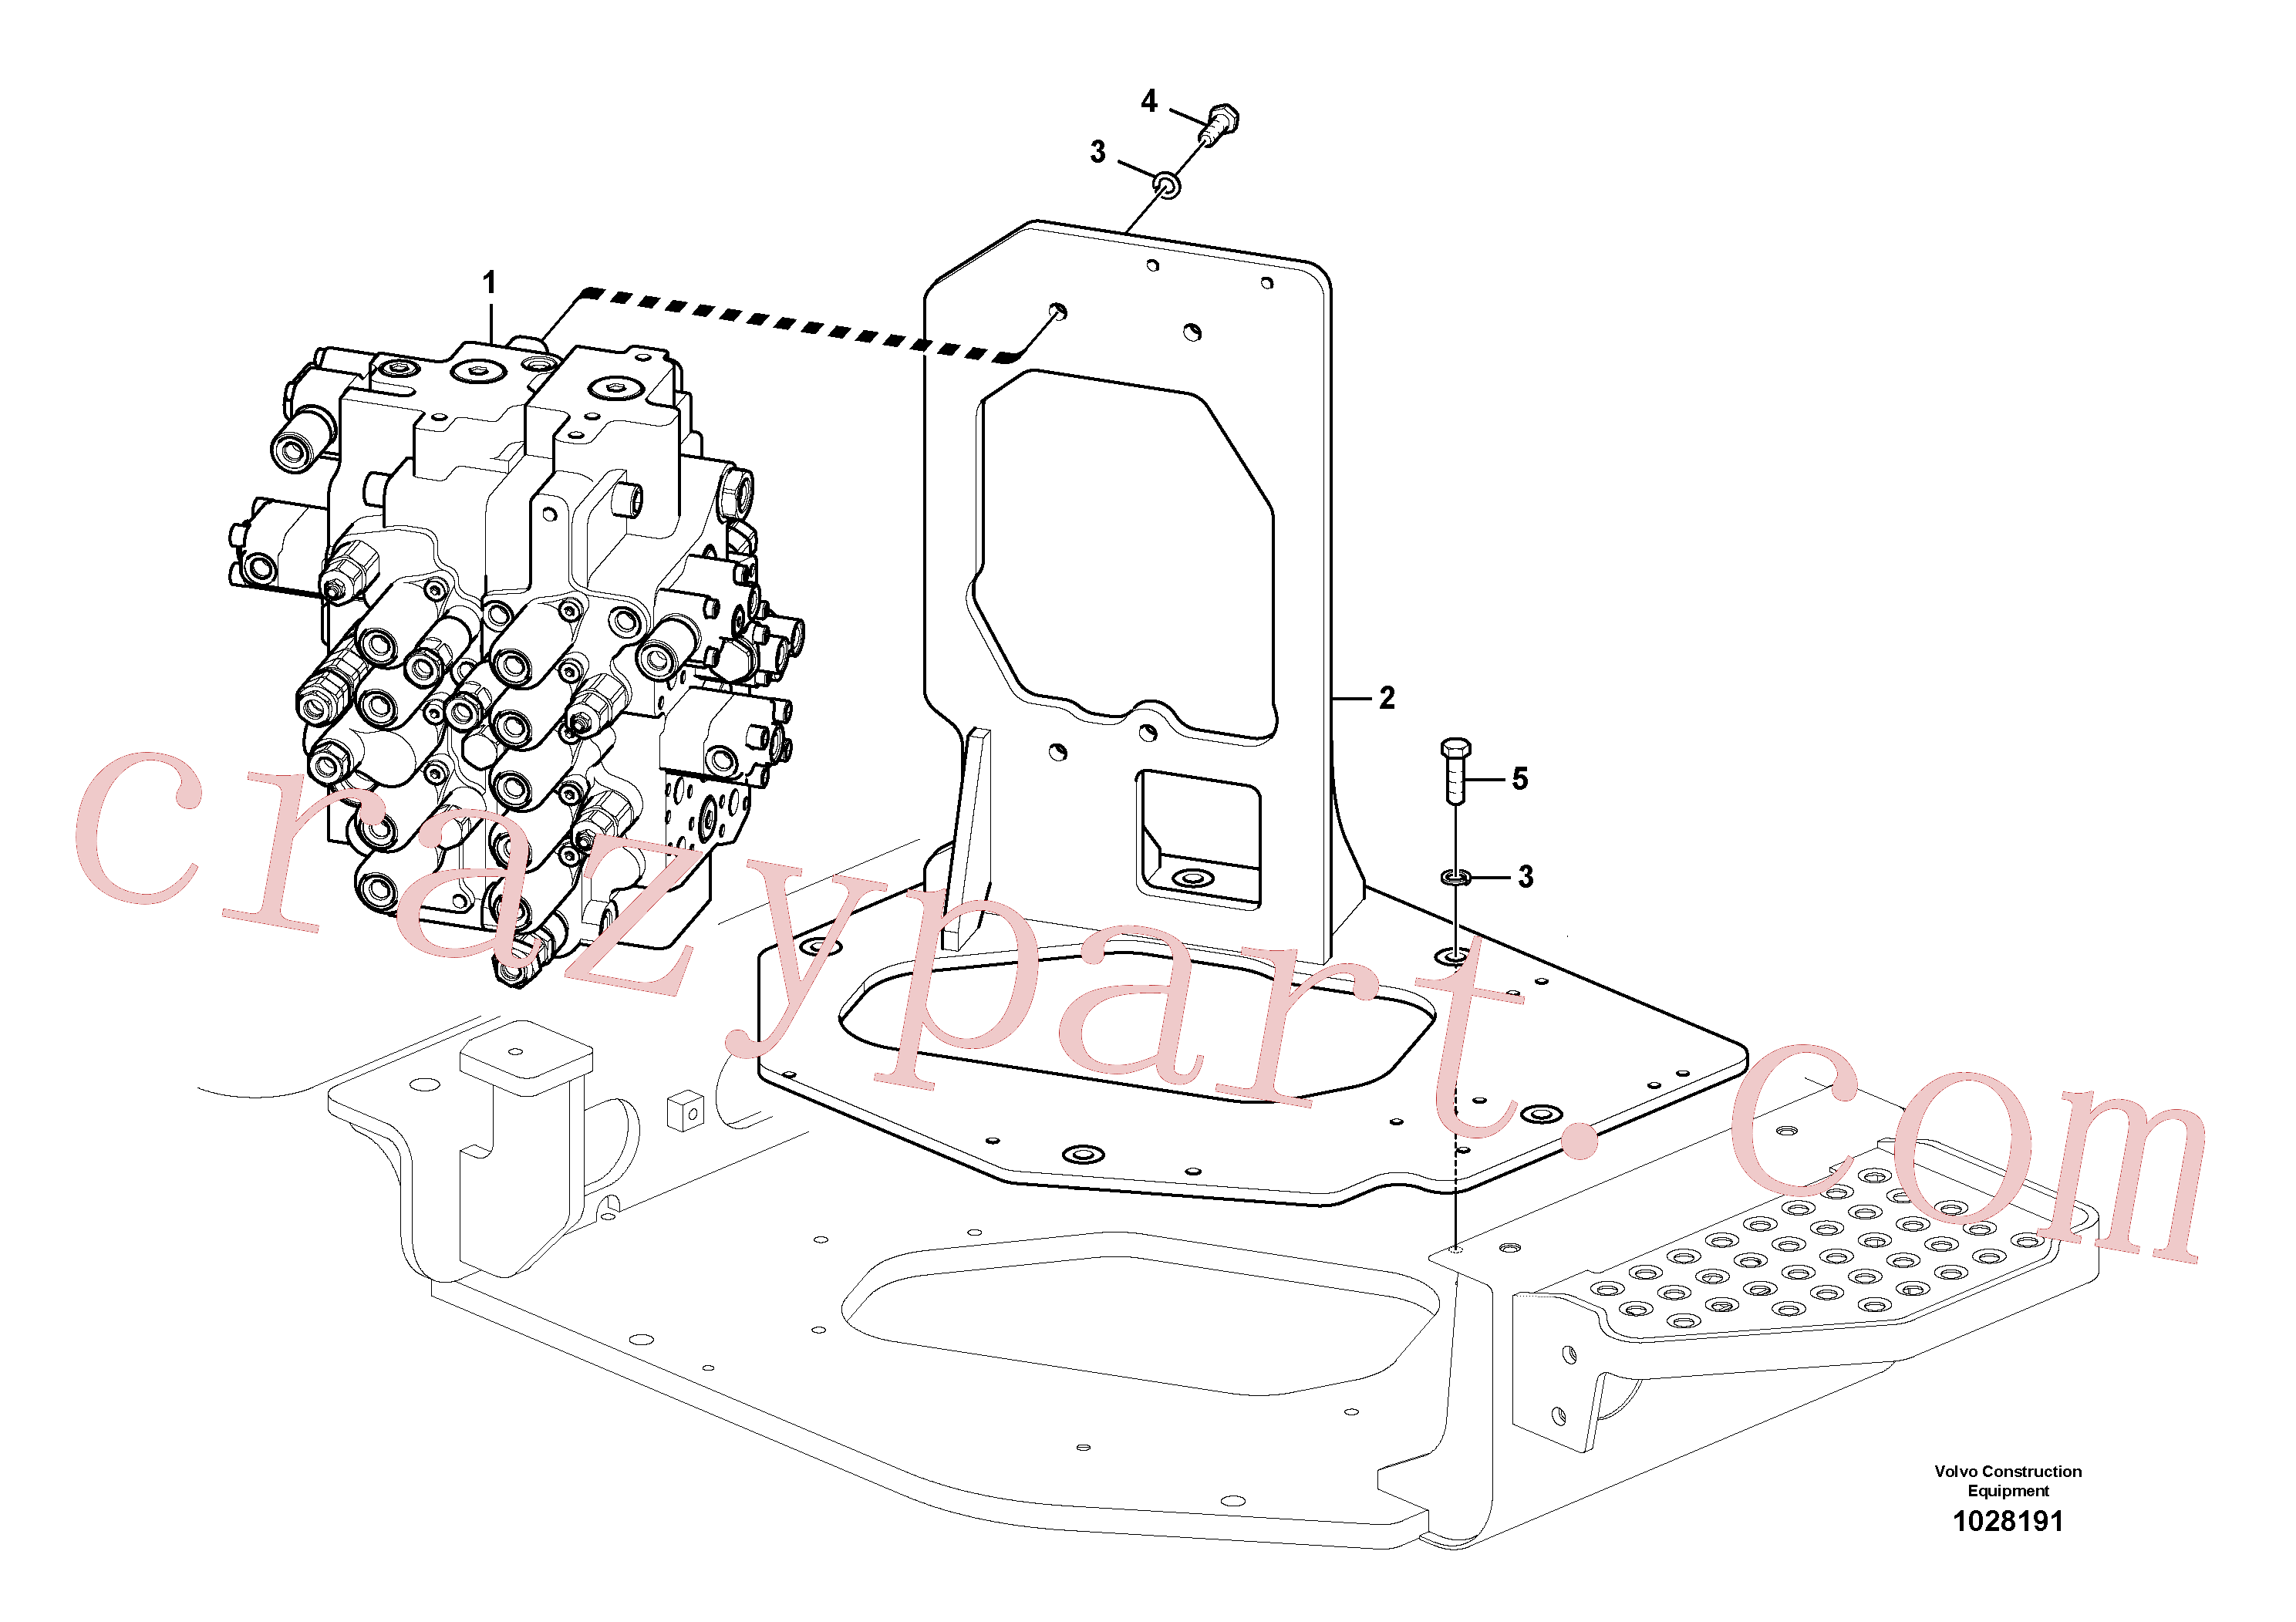 SA9011-11207 for Volvo Control valve with fitting parts.(1028191 assembly)